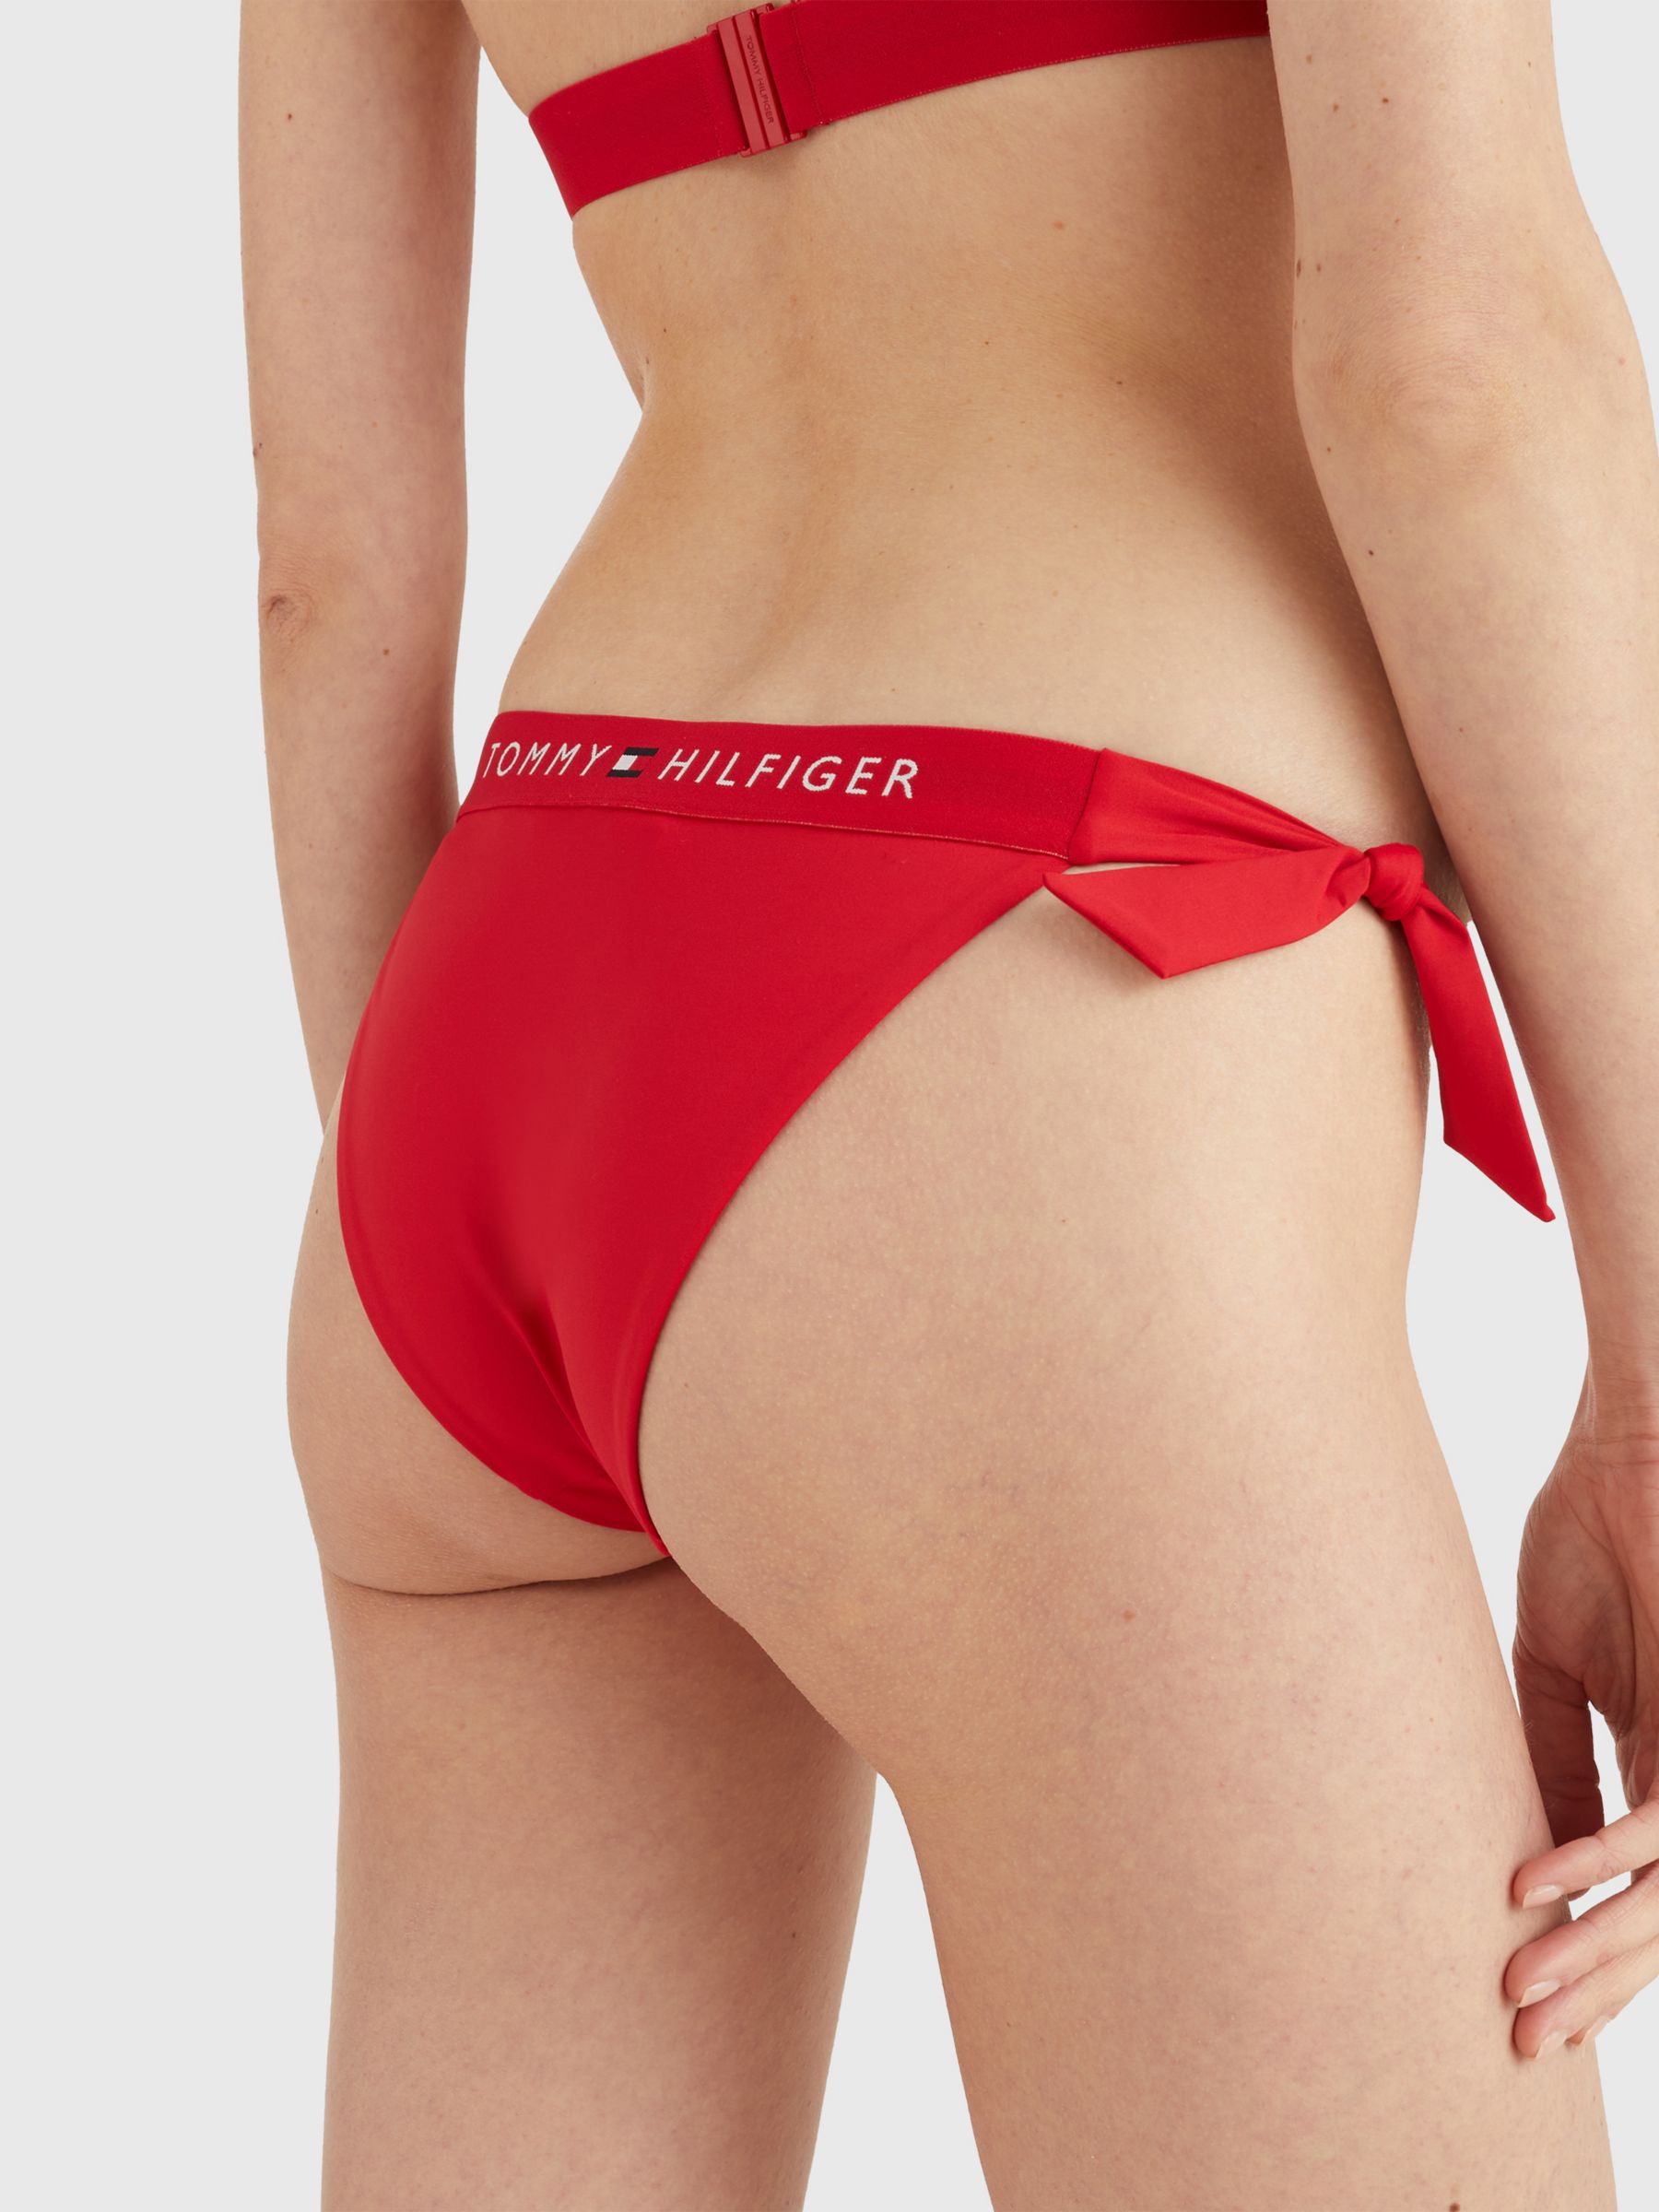 Tommy Hilfiger Cheeky Side Tie Bikini Bottoms, Primary Red, XS